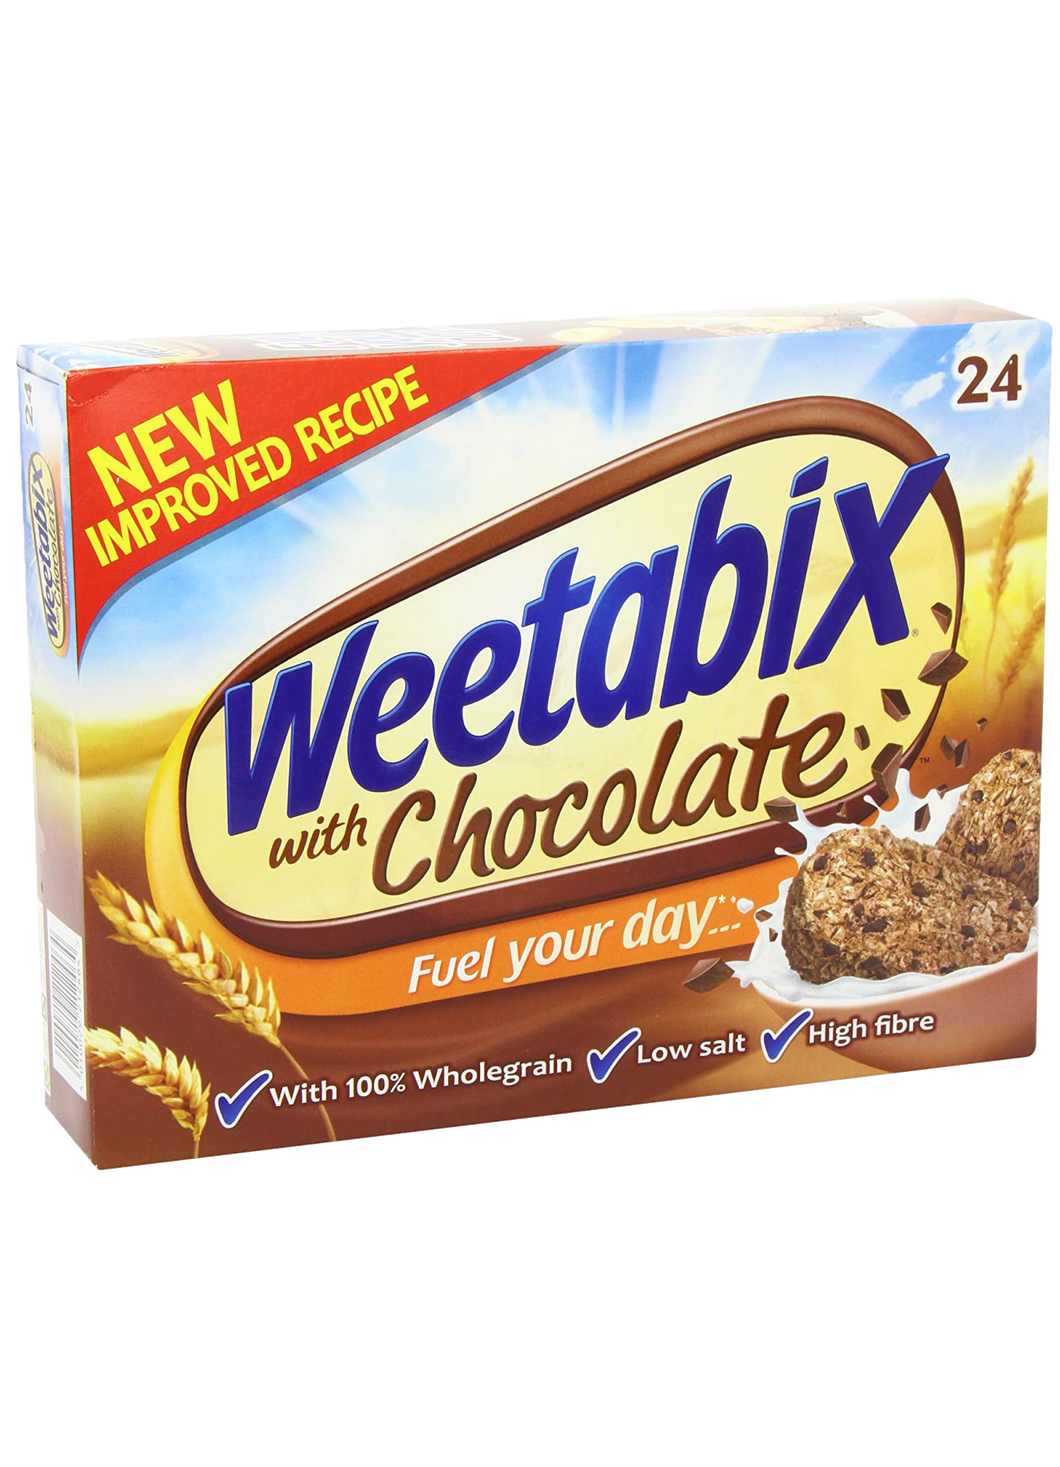 Weetabix with Chocolate 24 Biscuits